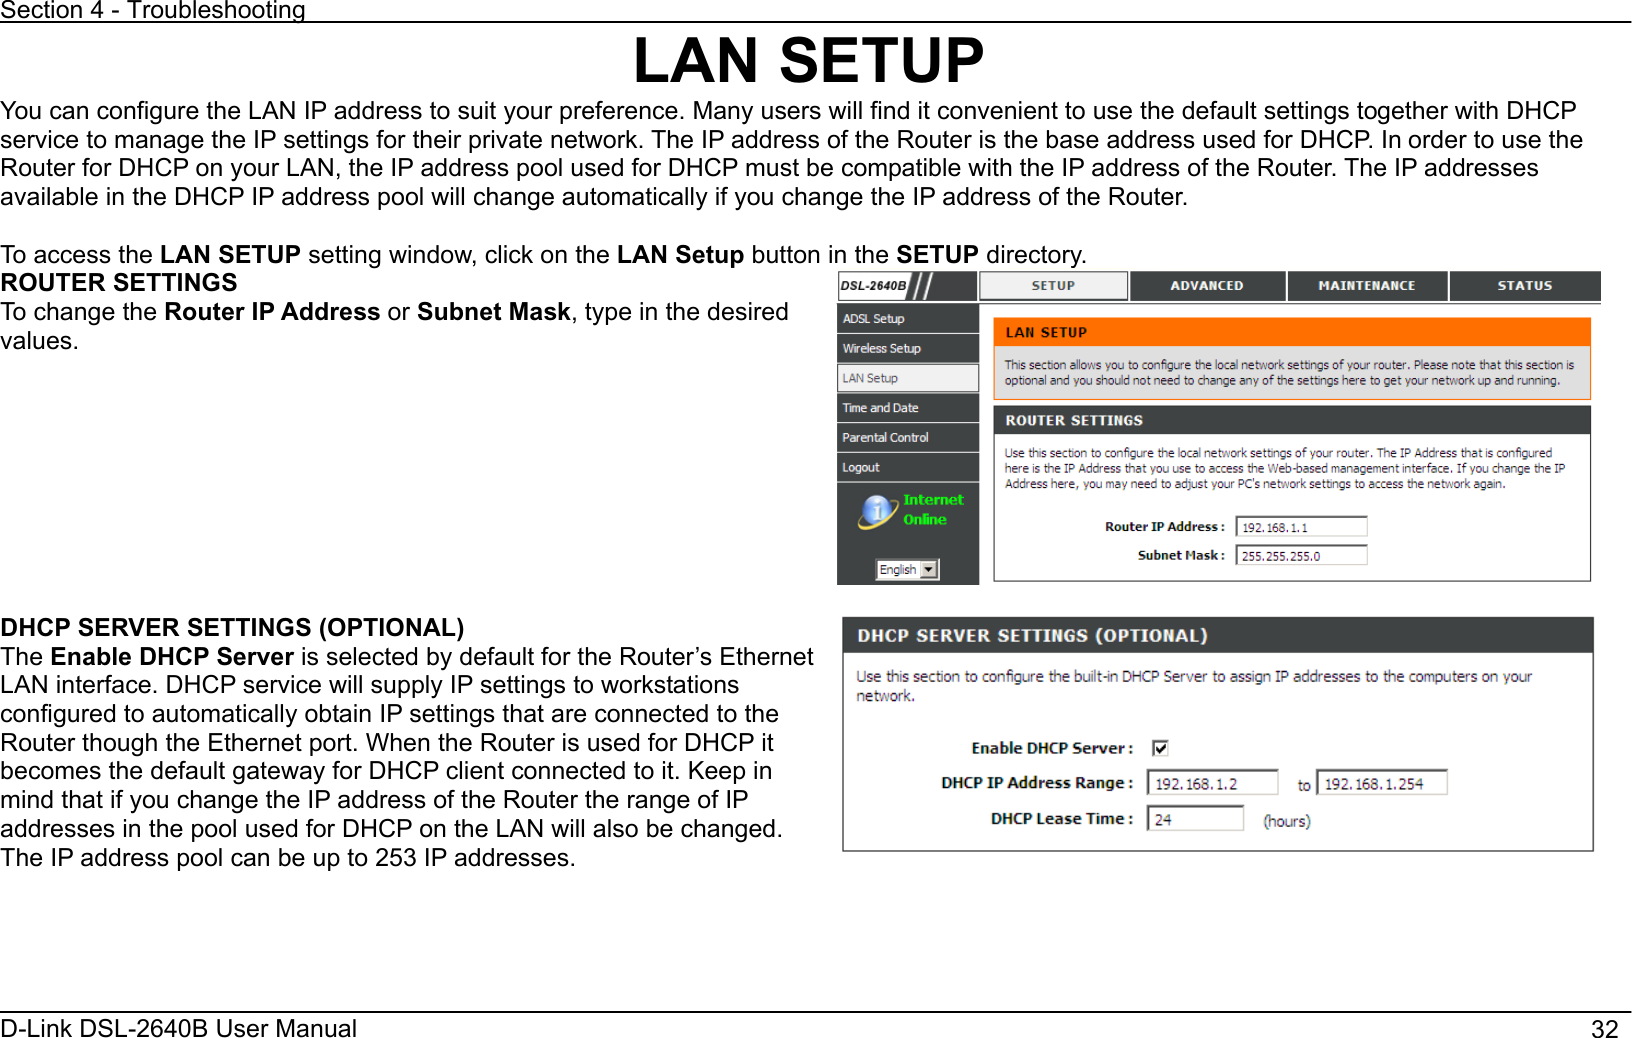 Section 4 - Troubleshooting D-Link DSL-2640B User Manual                                       32LAN SETUP You can configure the LAN IP address to suit your preference. Many users will find it convenient to use the default settings together with DHCP service to manage the IP settings for their private network. The IP address of the Router is the base address used for DHCP. In order to use the Router for DHCP on your LAN, the IP address pool used for DHCP must be compatible with the IP address of the Router. The IP addressesavailable in the DHCP IP address pool will change automatically if you change the IP address of the Router.   To access the LAN SETUP setting window, click on the LAN Setup button in the SETUP directory. ROUTER SETTINGS To change the Router IP Address or Subnet Mask, type in the desired values.DHCP SERVER SETTINGS (OPTIONAL) The Enable DHCP Server is selected by default for the Router’s Ethernet LAN interface. DHCP service will supply IP settings to workstations configured to automatically obtain IP settings that are connected to the Router though the Ethernet port. When the Router is used for DHCP it becomes the default gateway for DHCP client connected to it. Keep in mind that if you change the IP address of the Router the range of IP addresses in the pool used for DHCP on the LAN will also be changed. The IP address pool can be up to 253 IP addresses. 